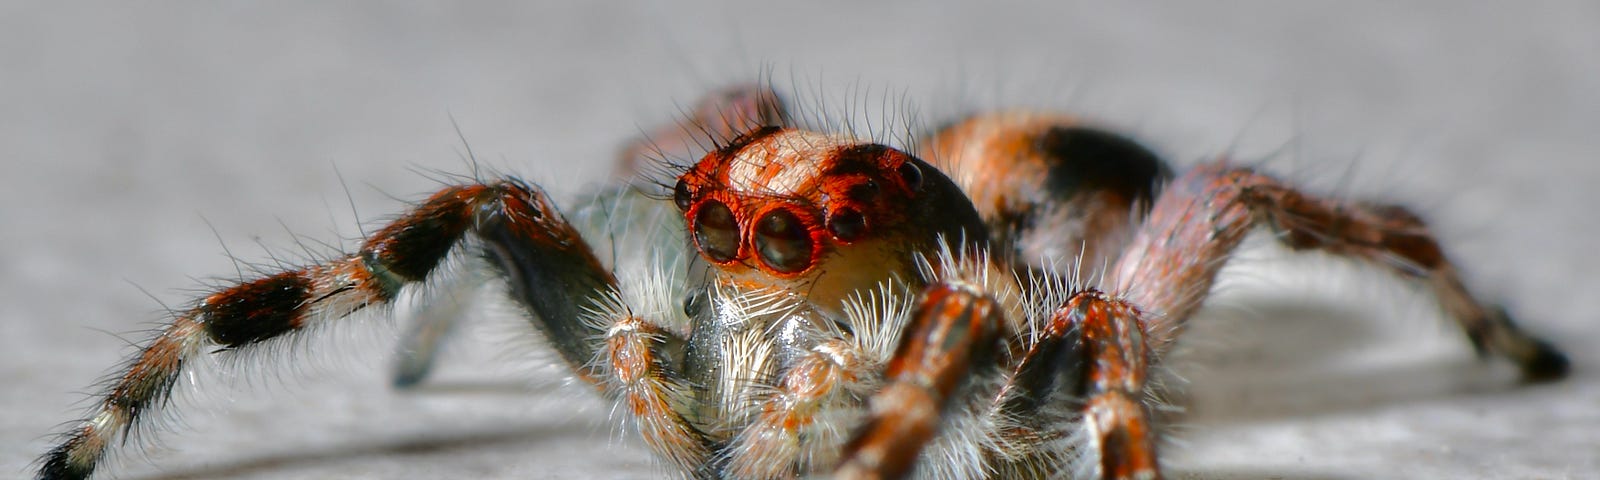 Image shows a close up of a hairy spider, with its legs outstretched and red ringed eyes.